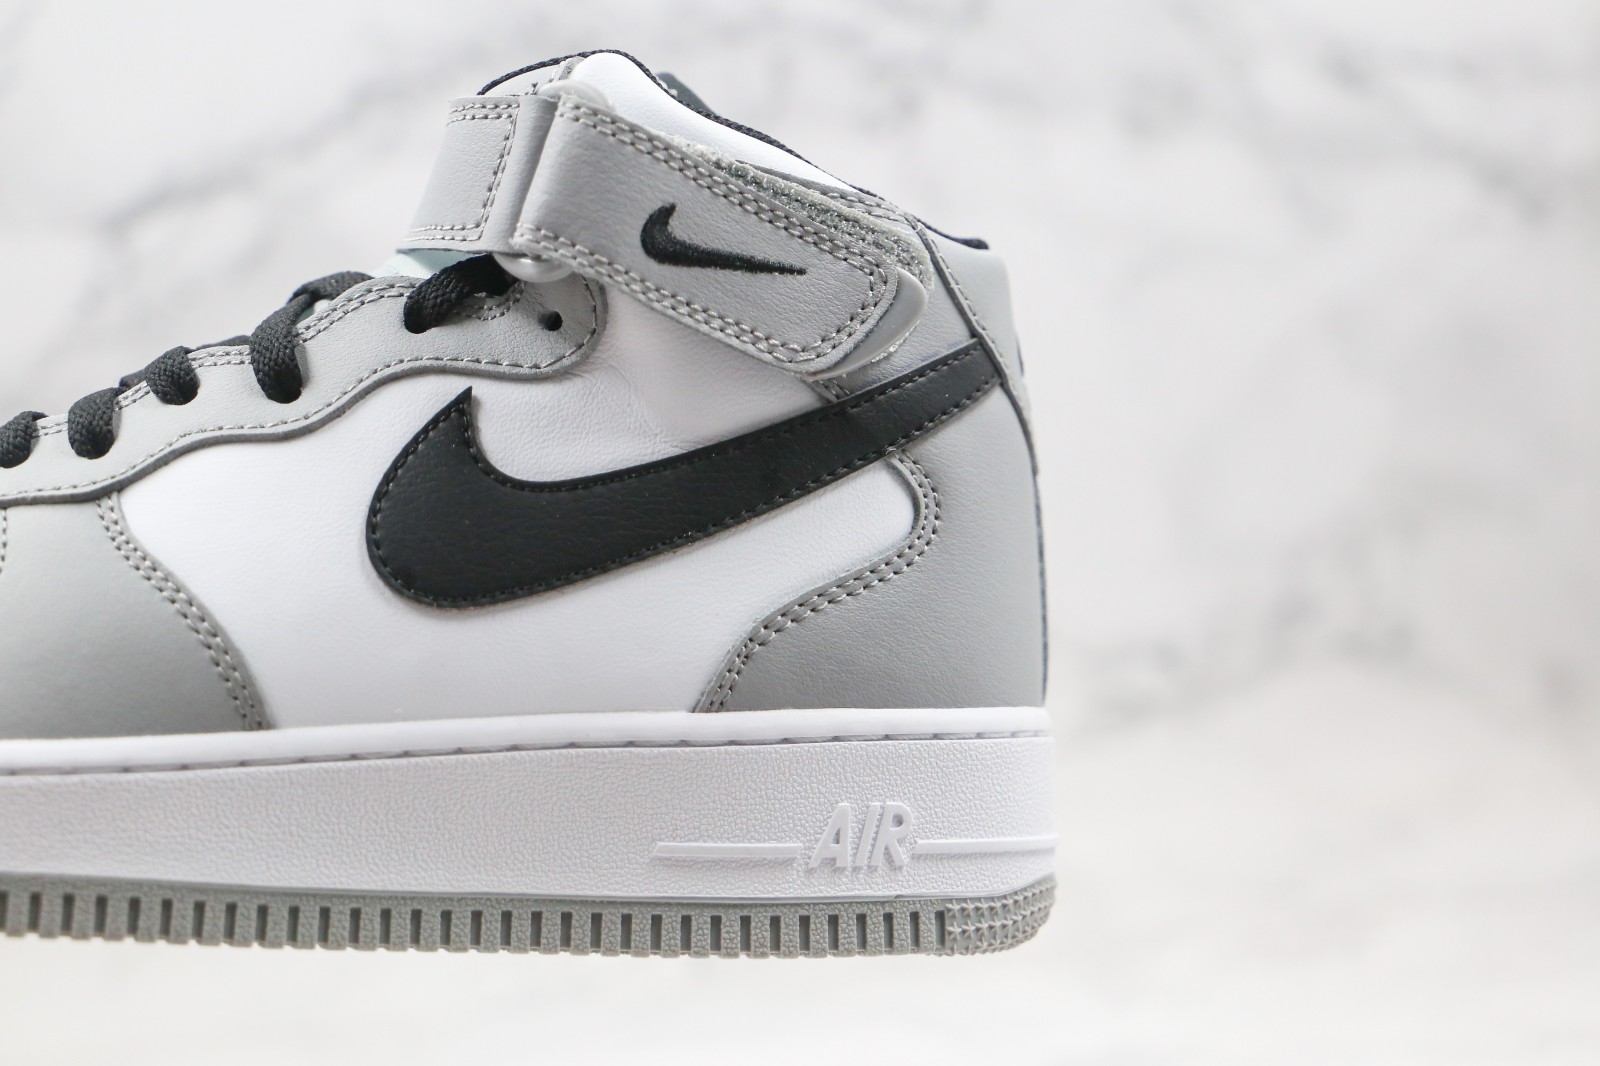 GmarShops - Air Force 1 Mid Cool Grey Black Lifestyle Shoes CT1266 - nike free v5 womens - 092